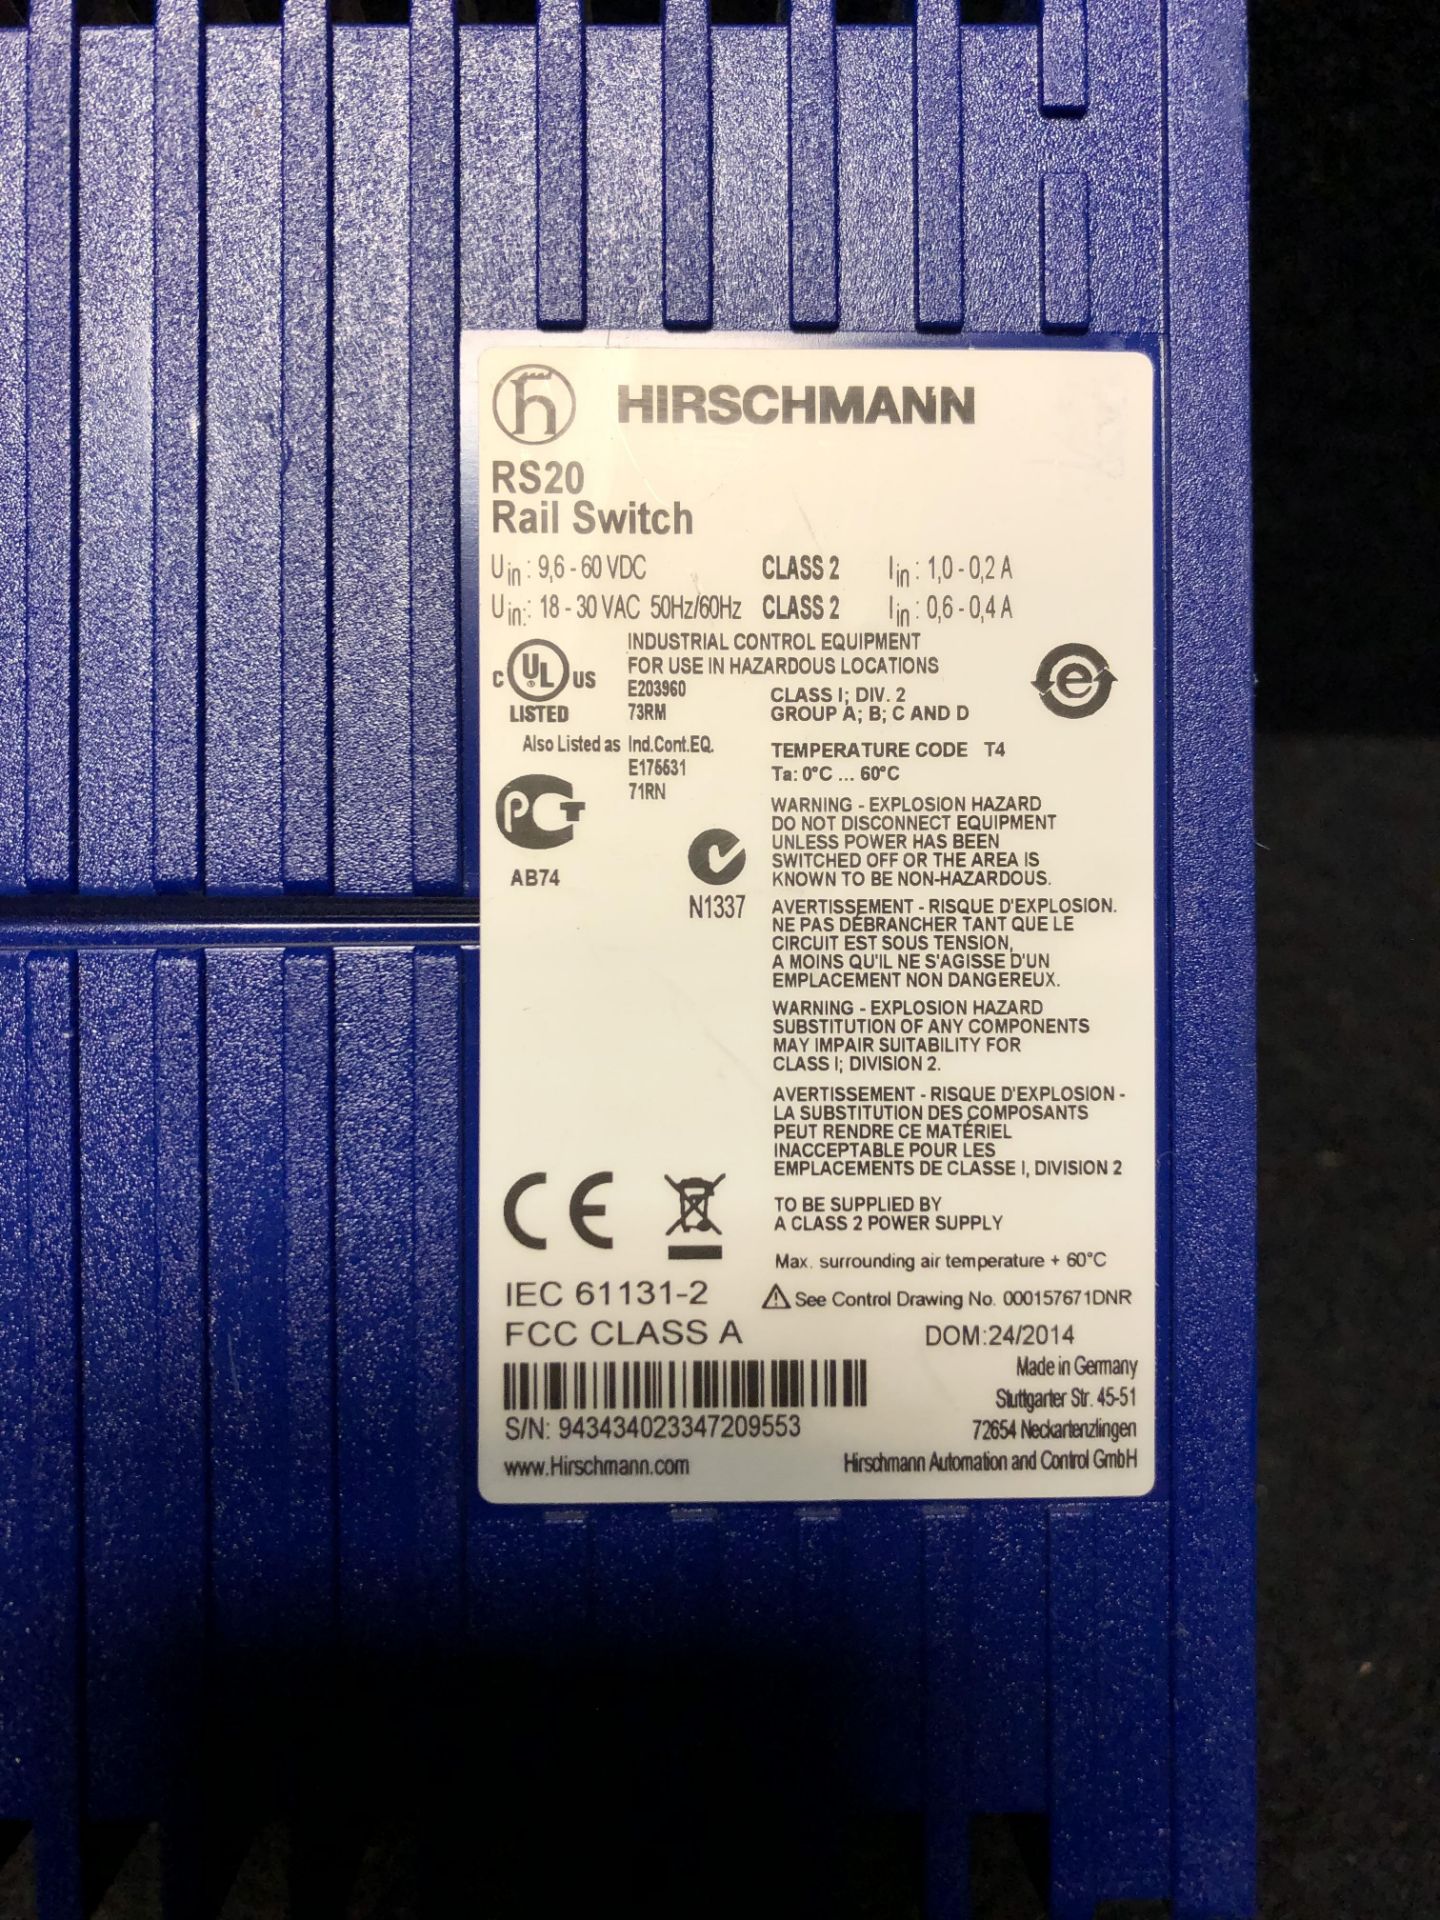 LOT OF 2 - HIRSCHMANN ETHERNET RAIL SWITCH RS20 - Image 6 of 6